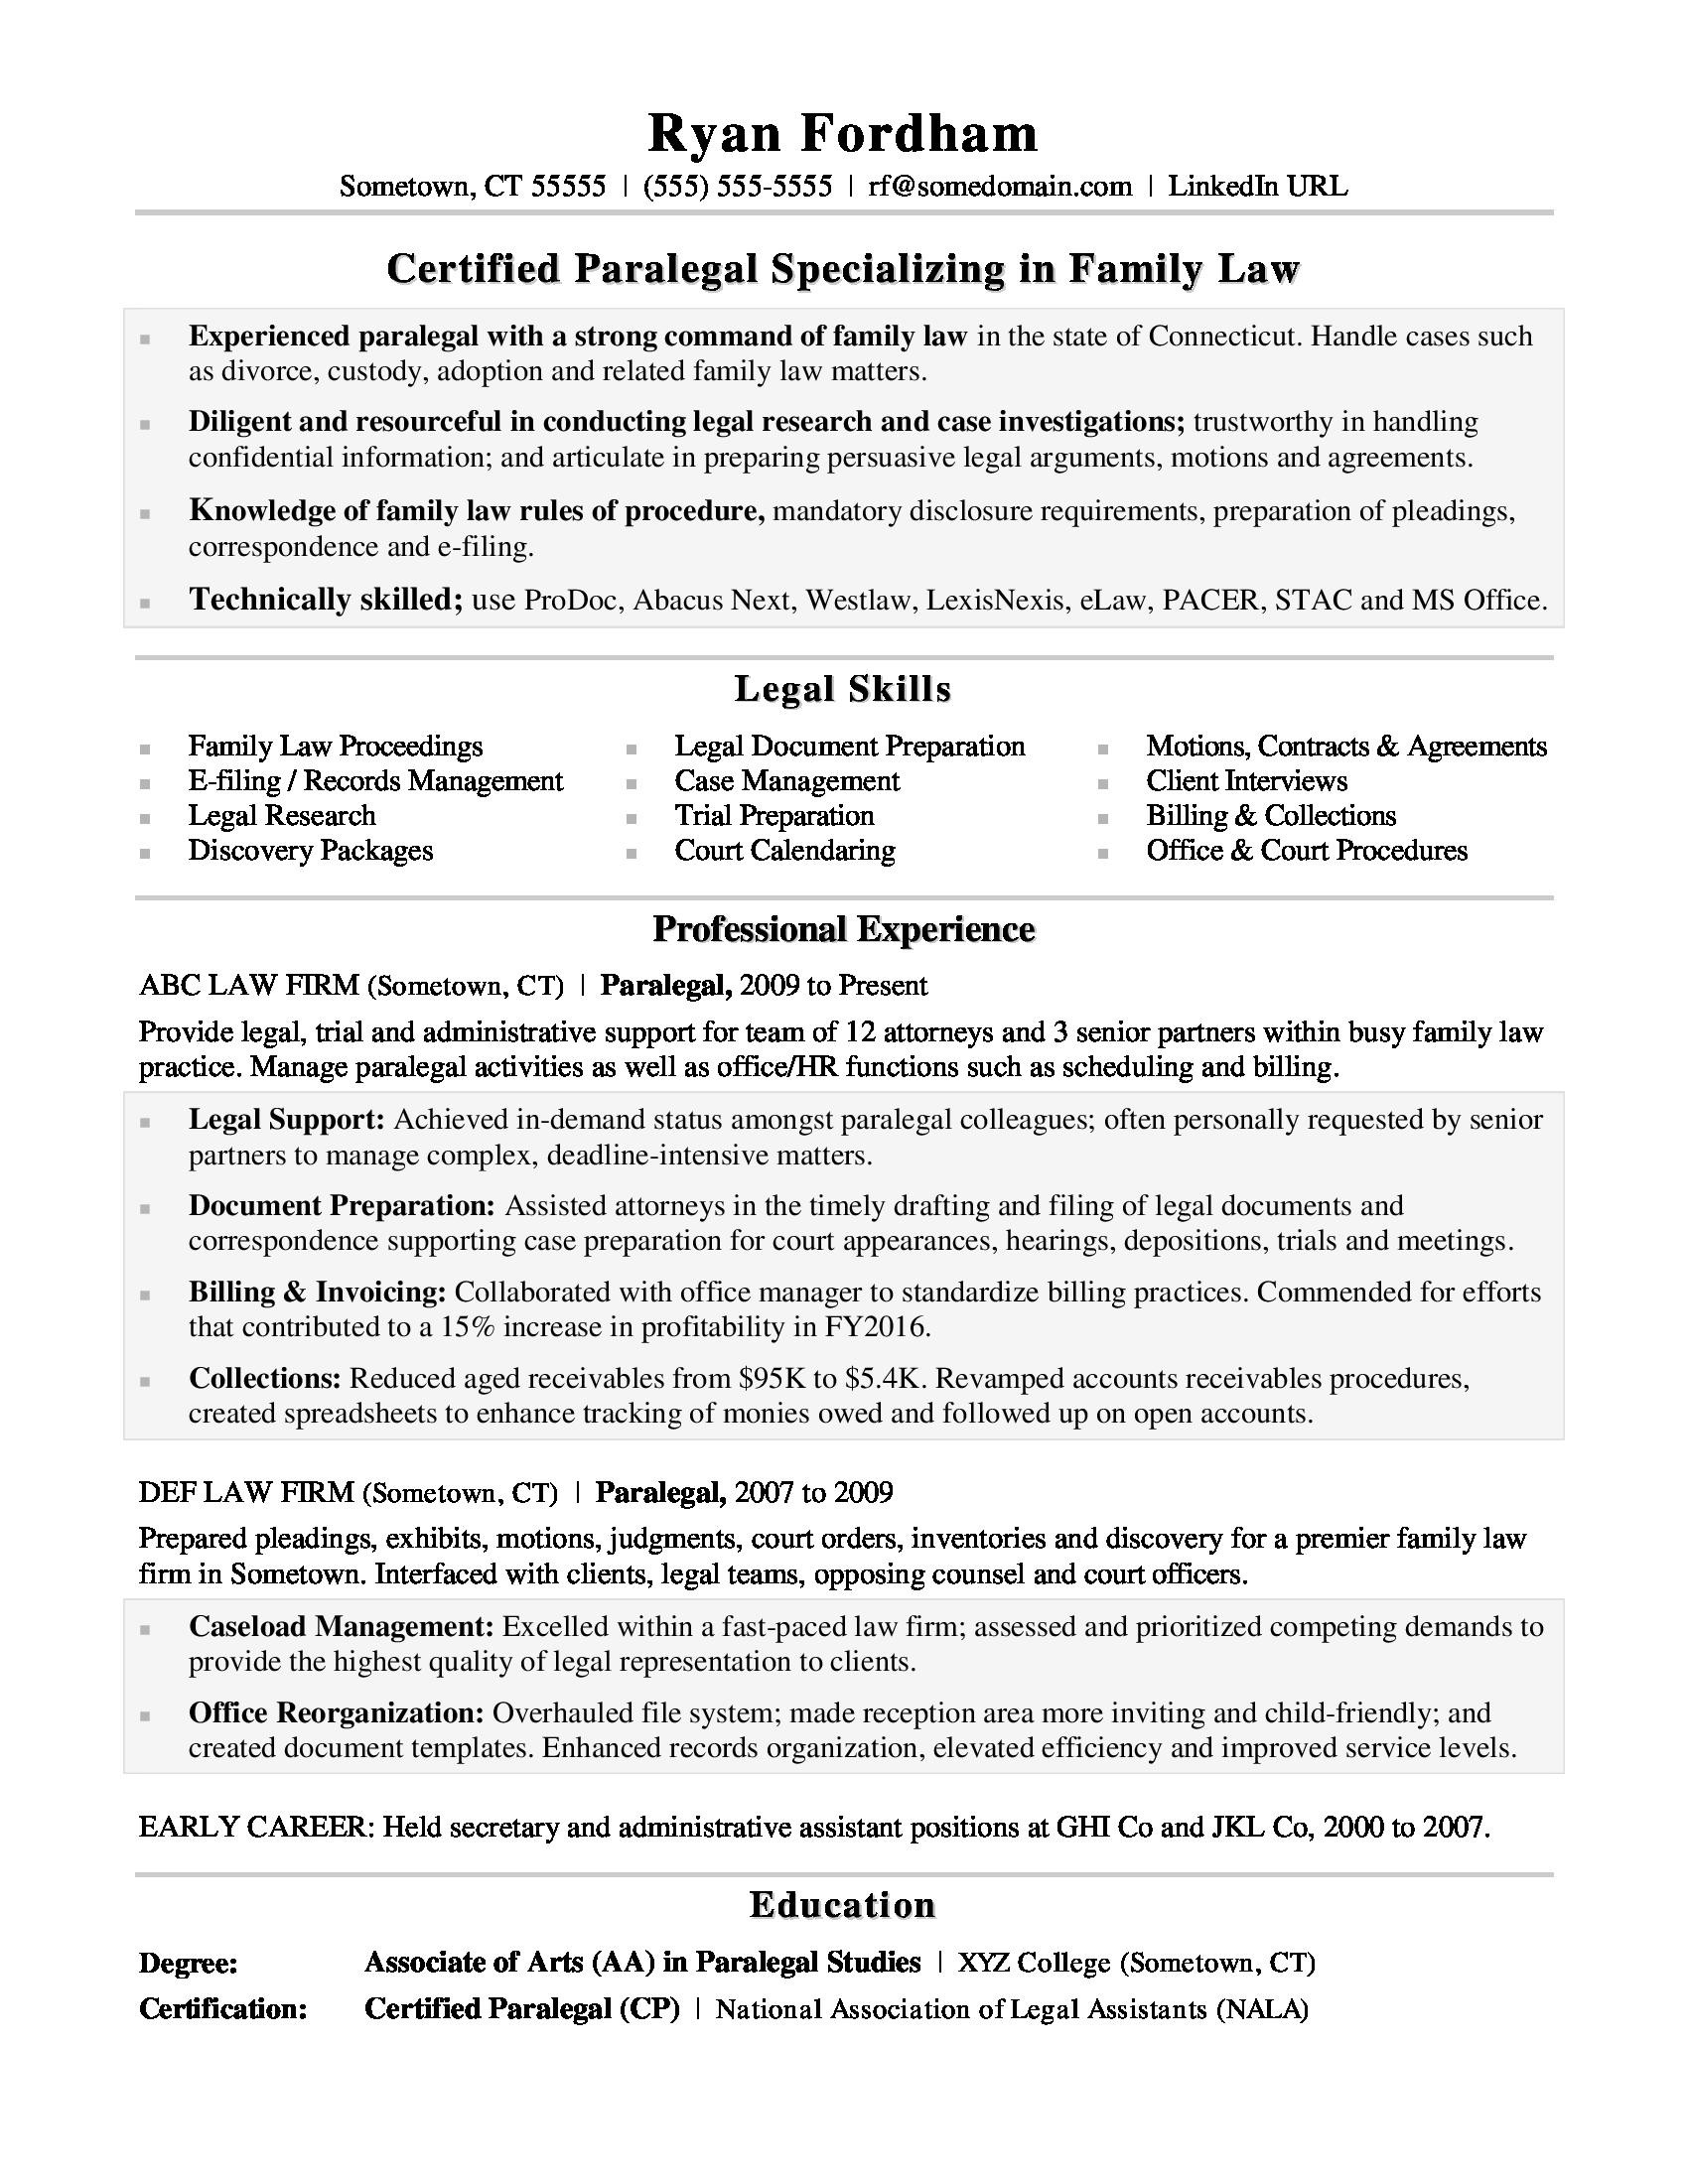 Samples Of Entry Level Paralegal Resume and Cover Letter Paralegal Resume Sample Monster.com